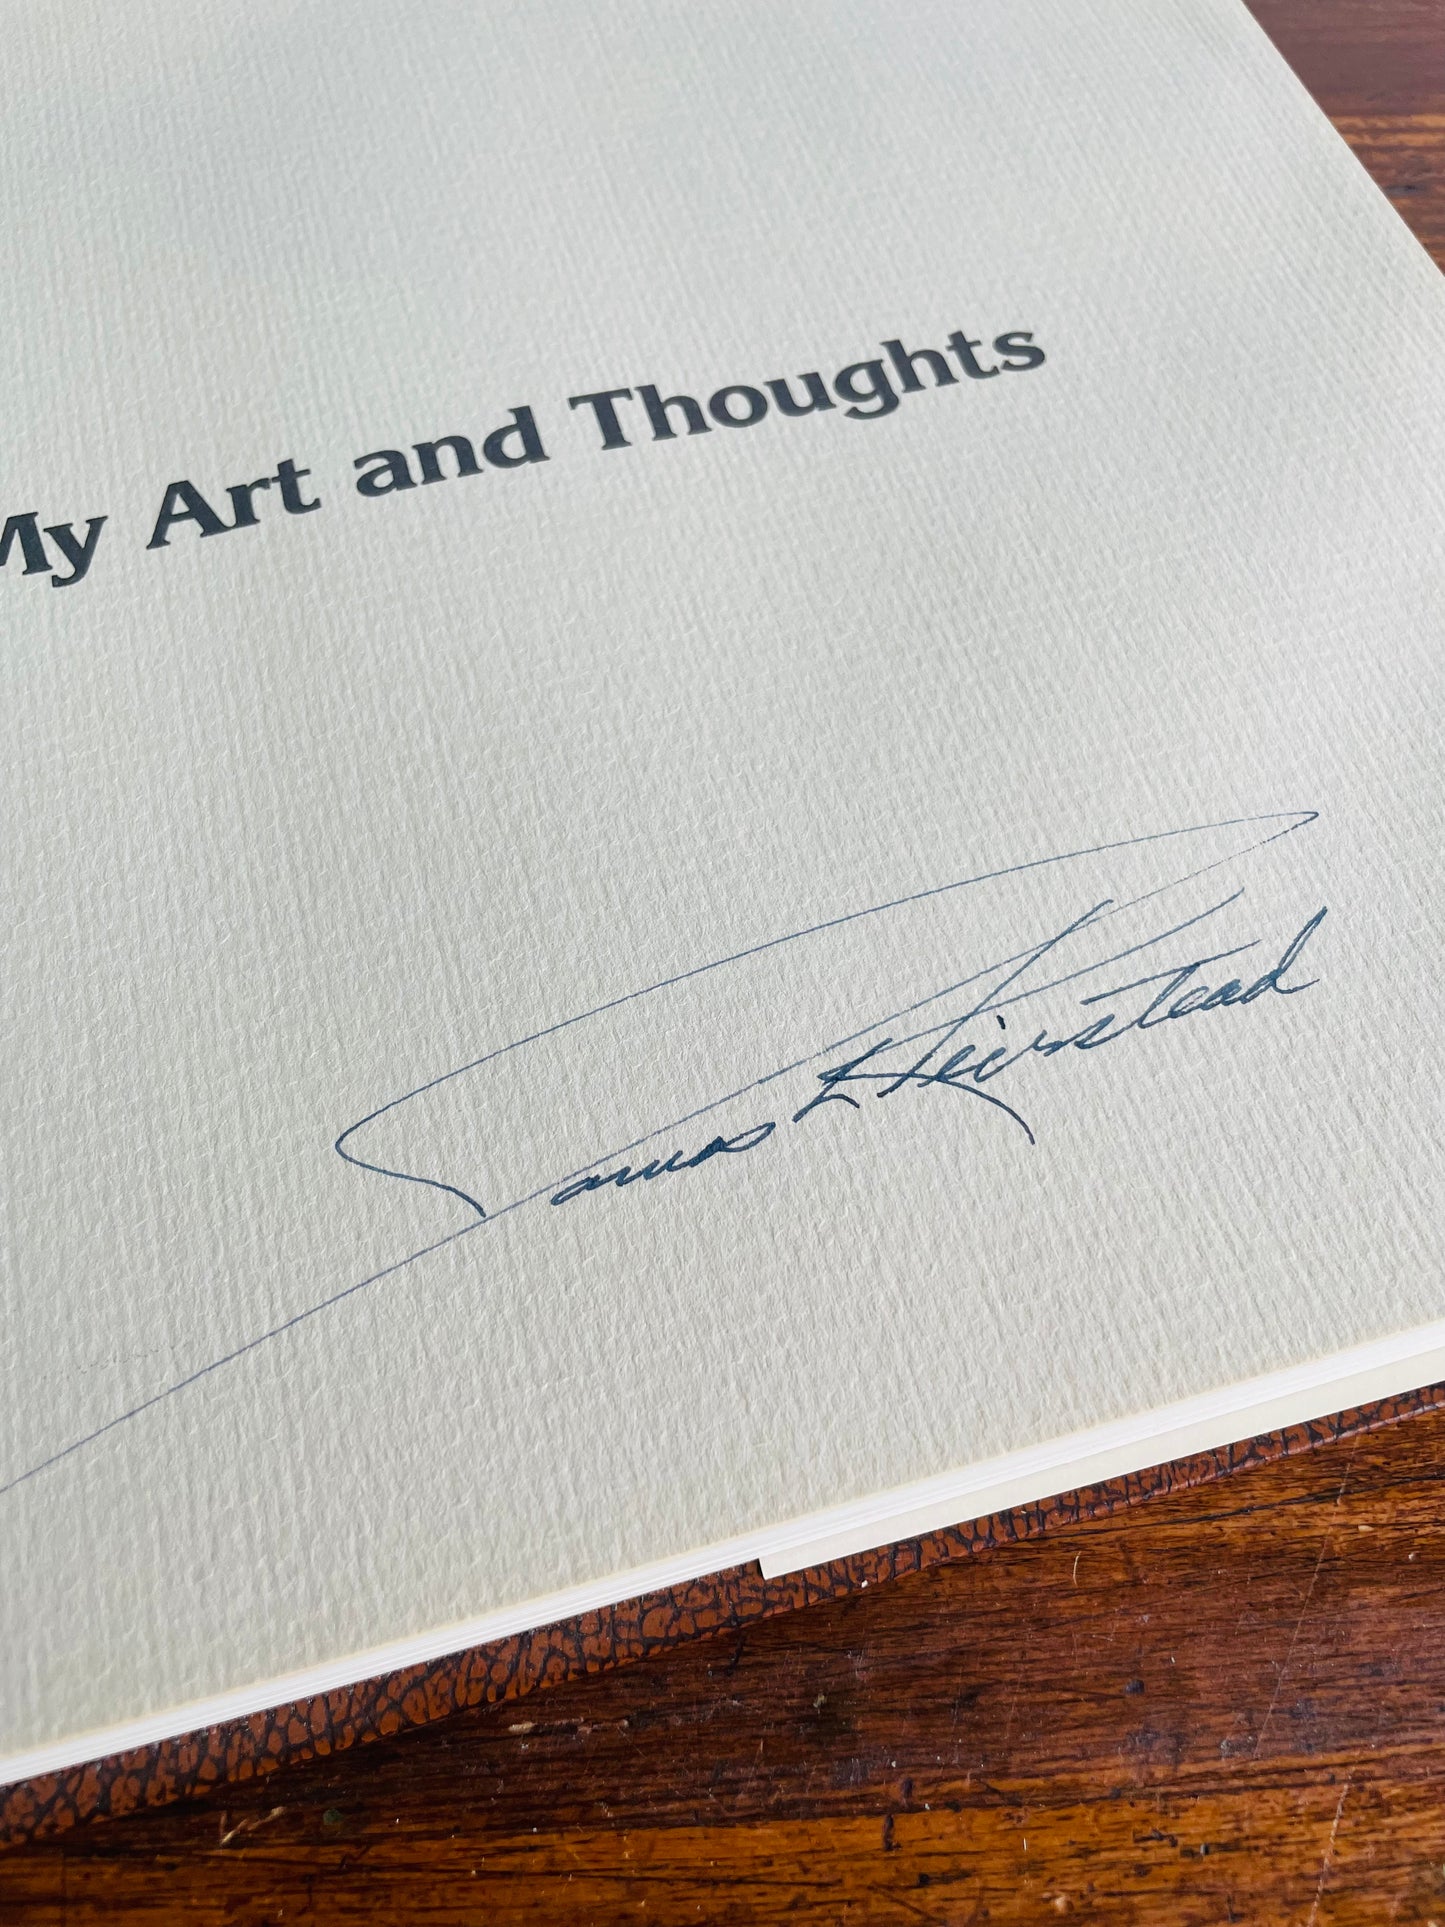 SIGNED COPY Keirstead: My Art & Thoughts Hardcover Book (1979)